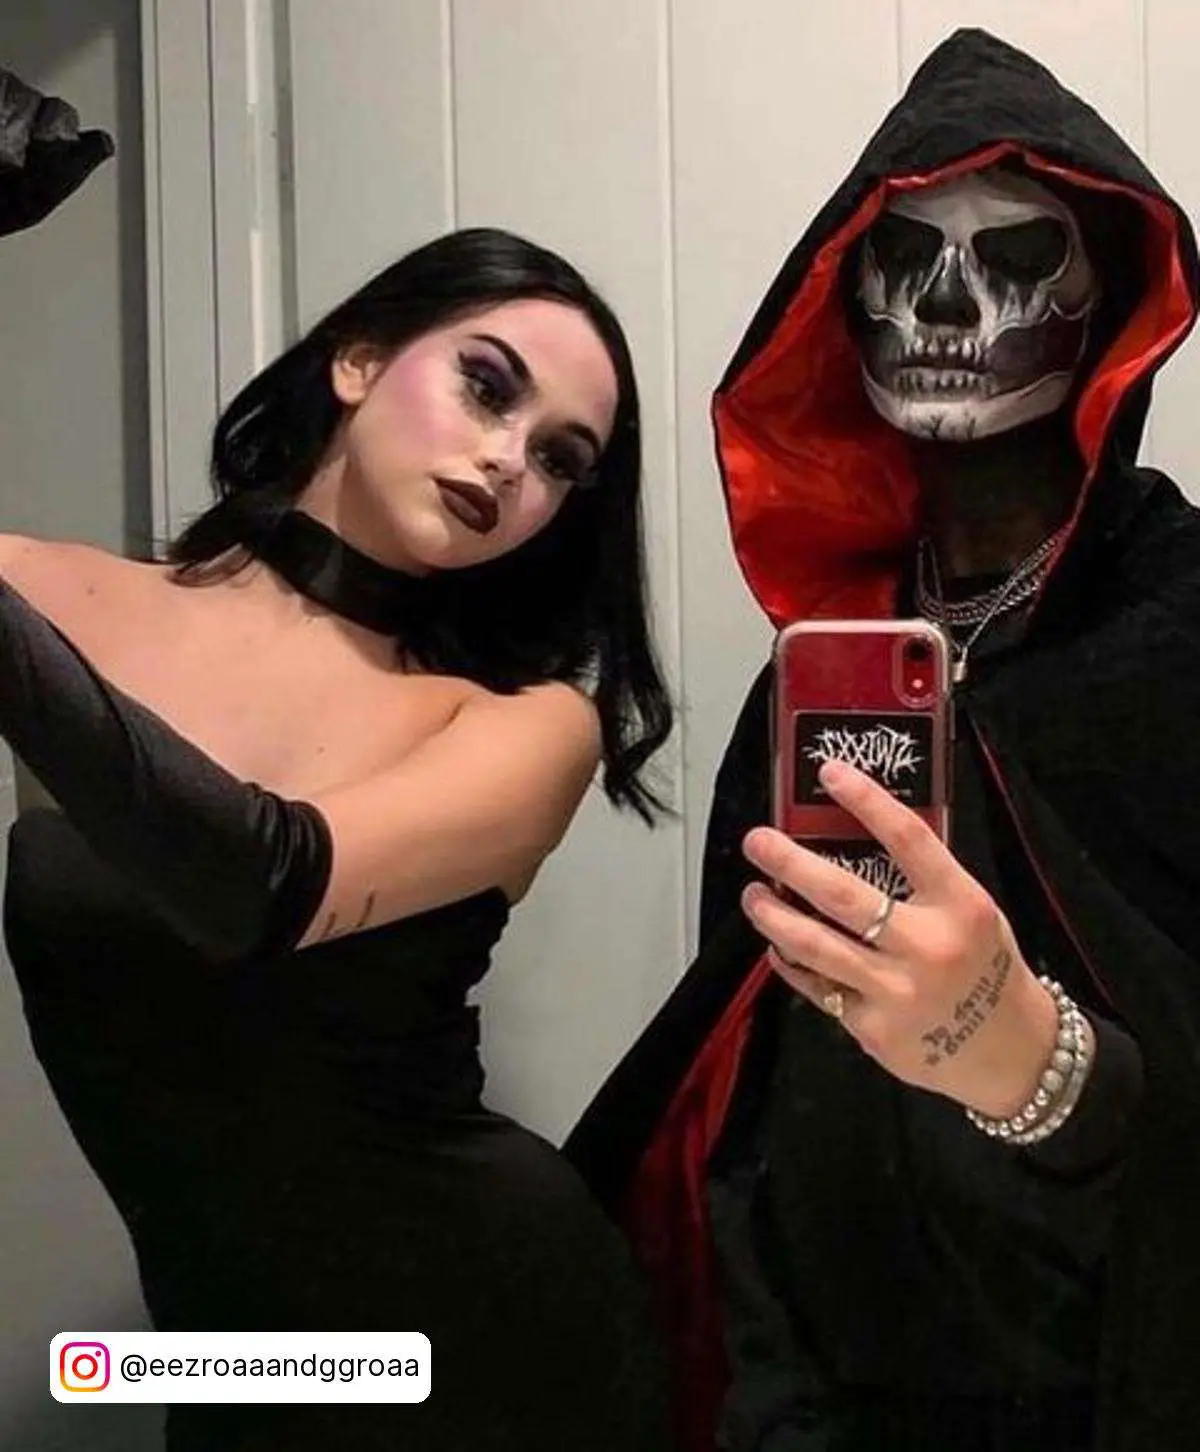 Sexiest Couples Costumes For Halloween